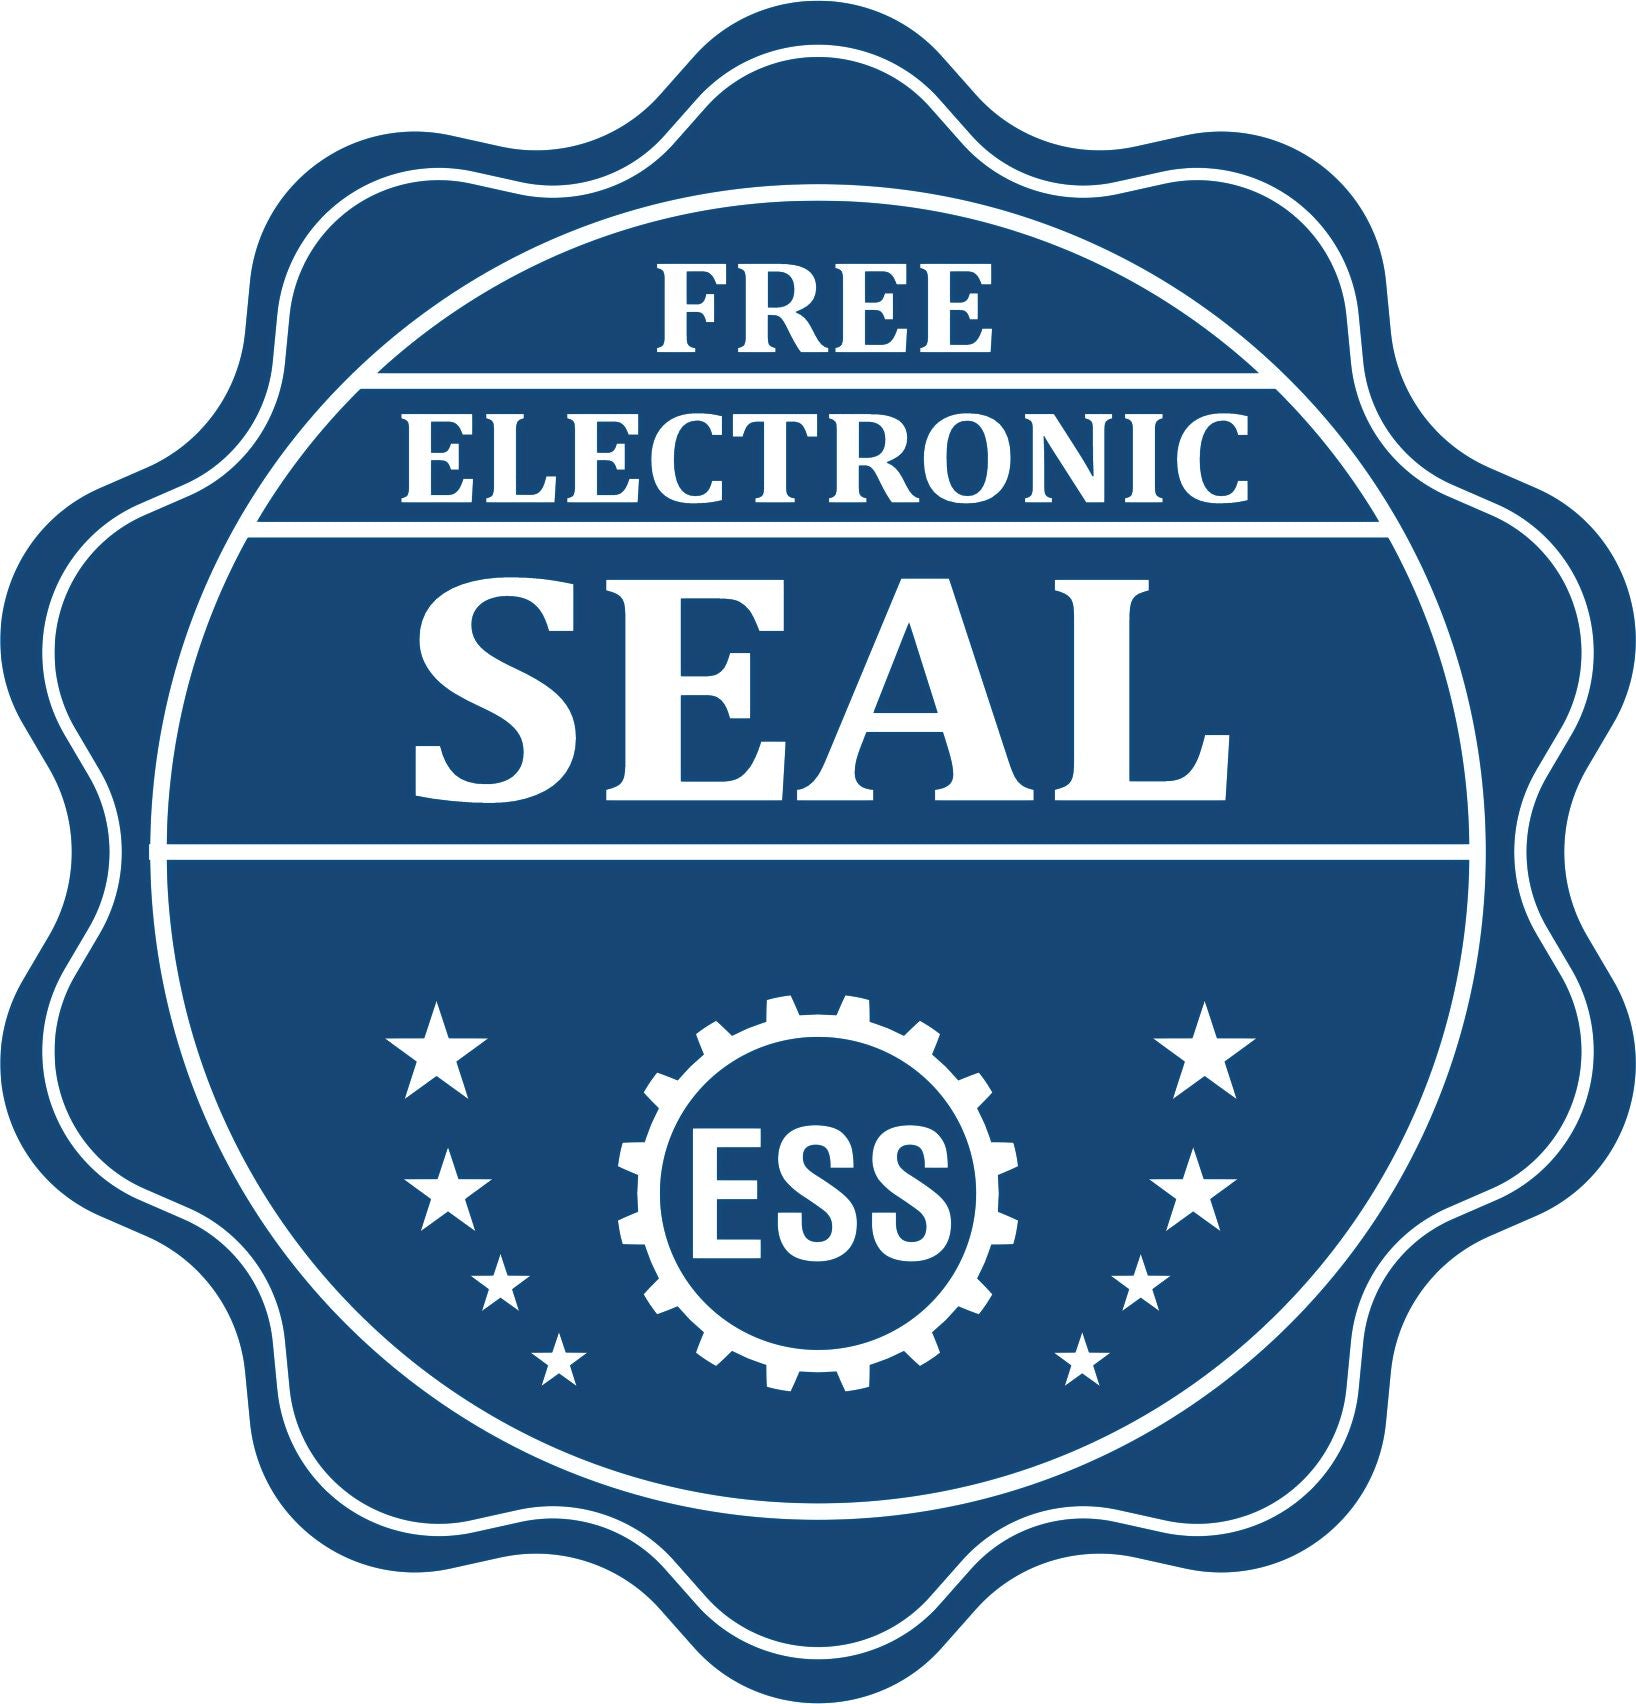 A badge showing a free electronic seal for the Slim Pre-Inked Indiana Land Surveyor Seal Stamp with stars and the ESS gear on the emblem.